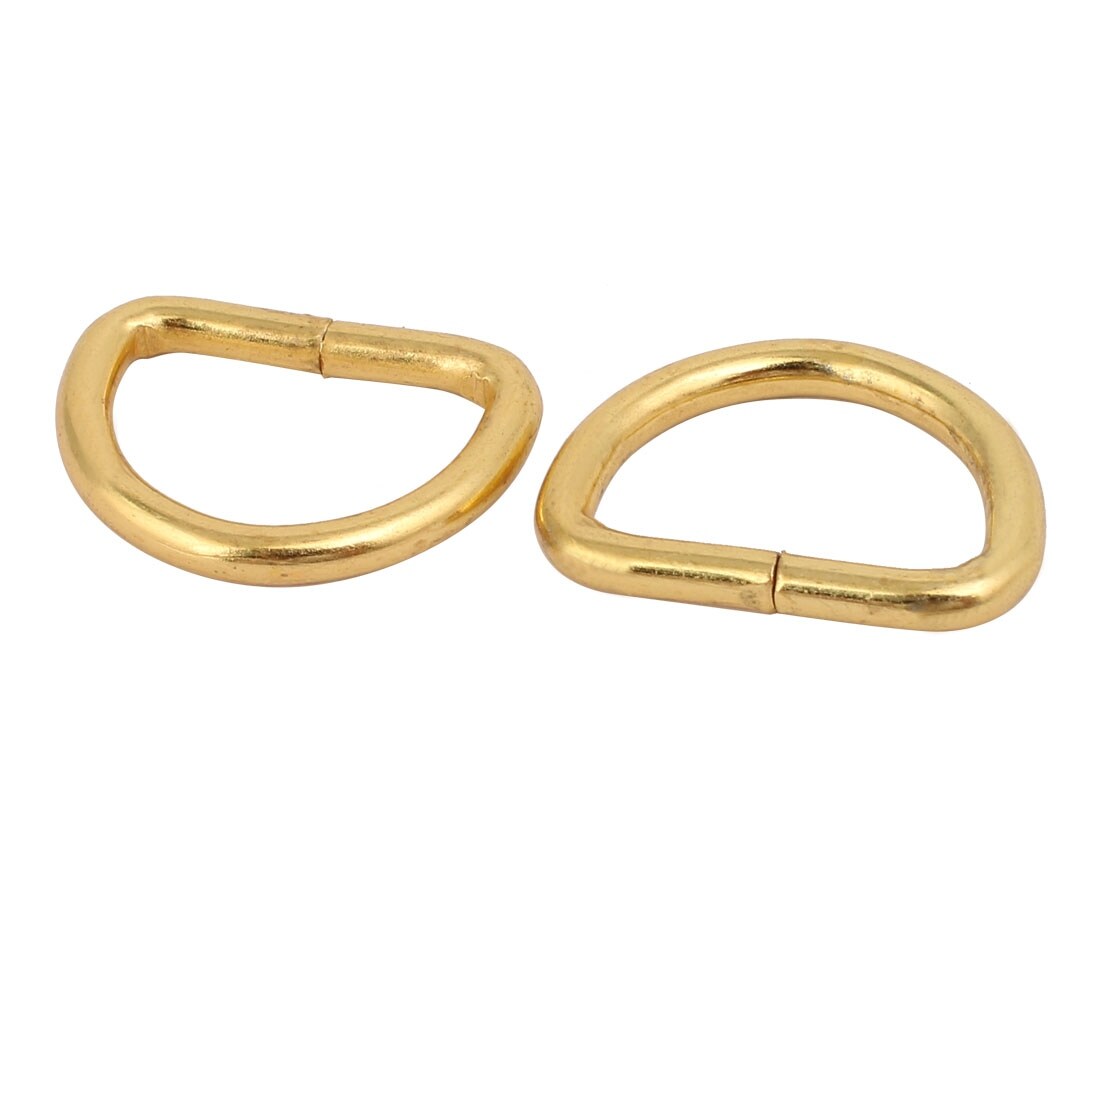 20mm Inner Width Iron Half Round Non Welded D Ring Gold Tone 10pcs - Gold Tone